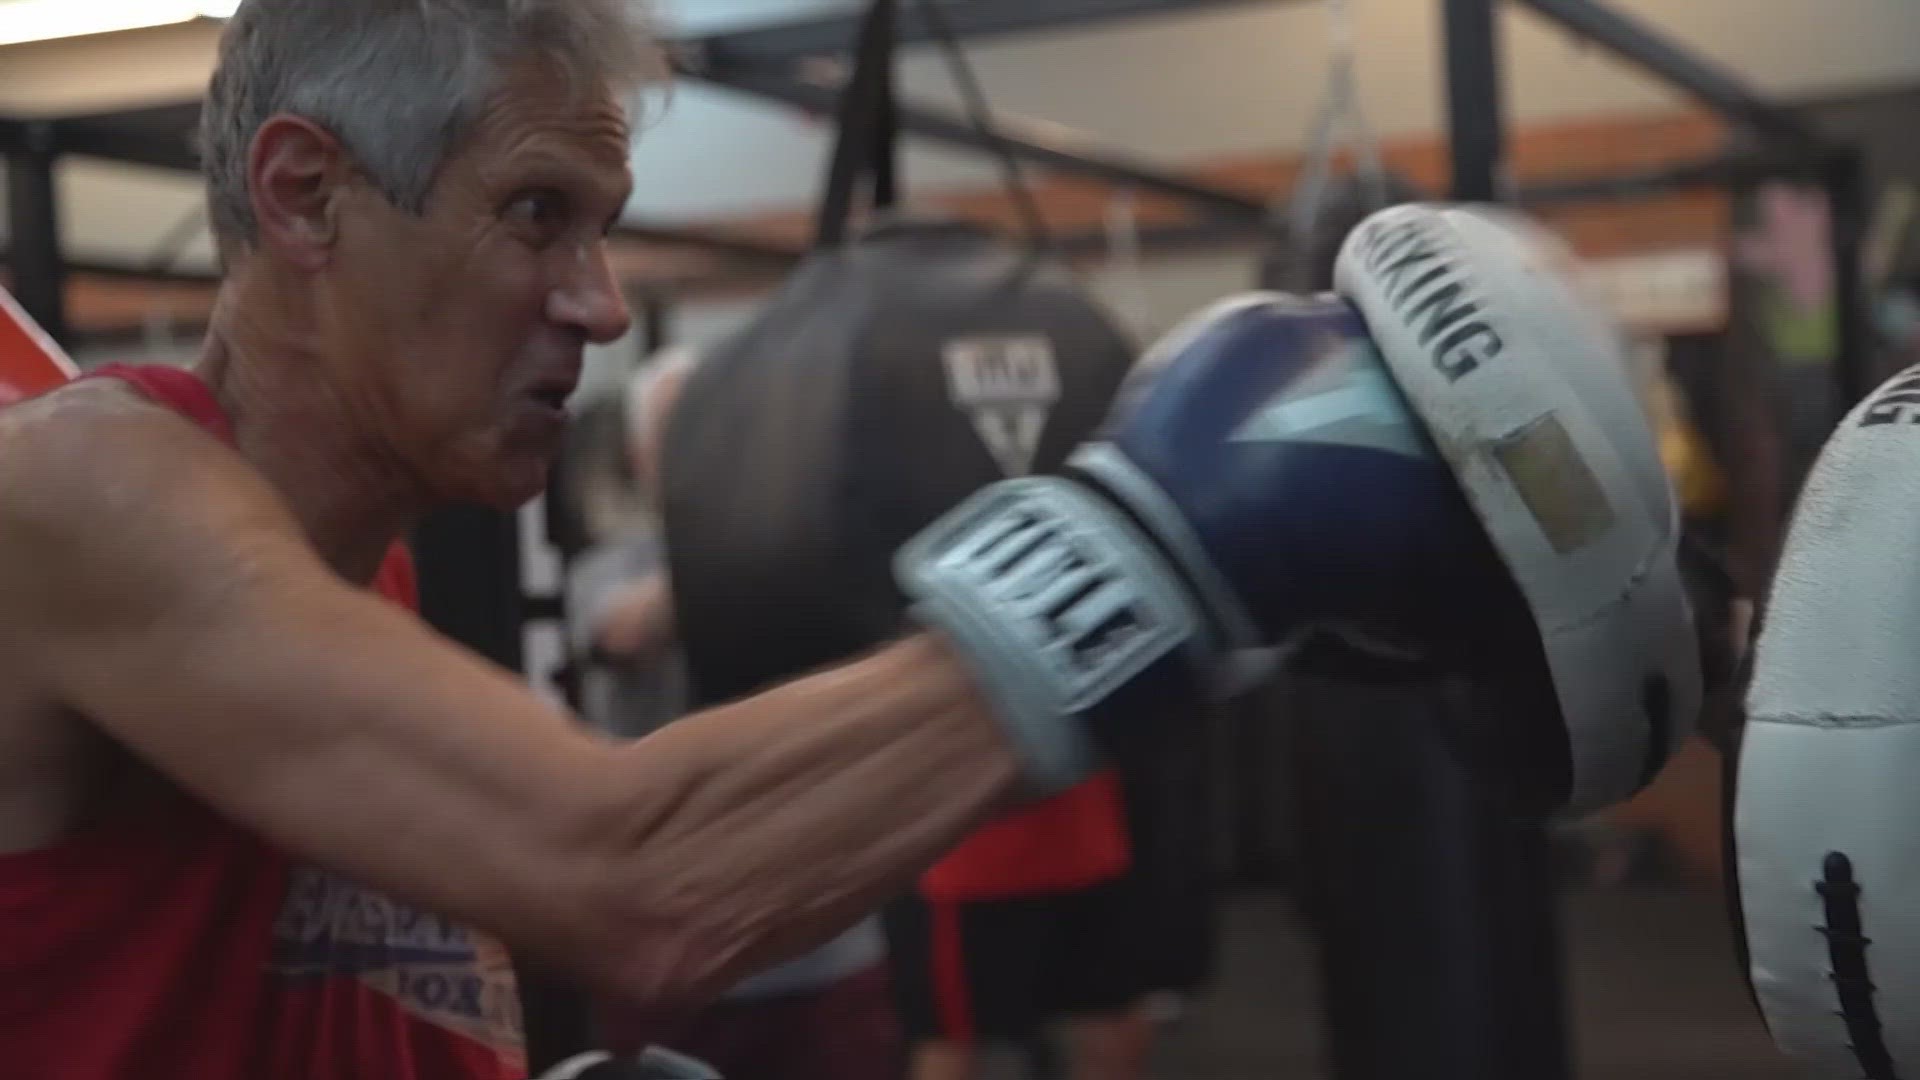 Rock Steady Boxing fights Parkinsons in Missouri City, Texas khou